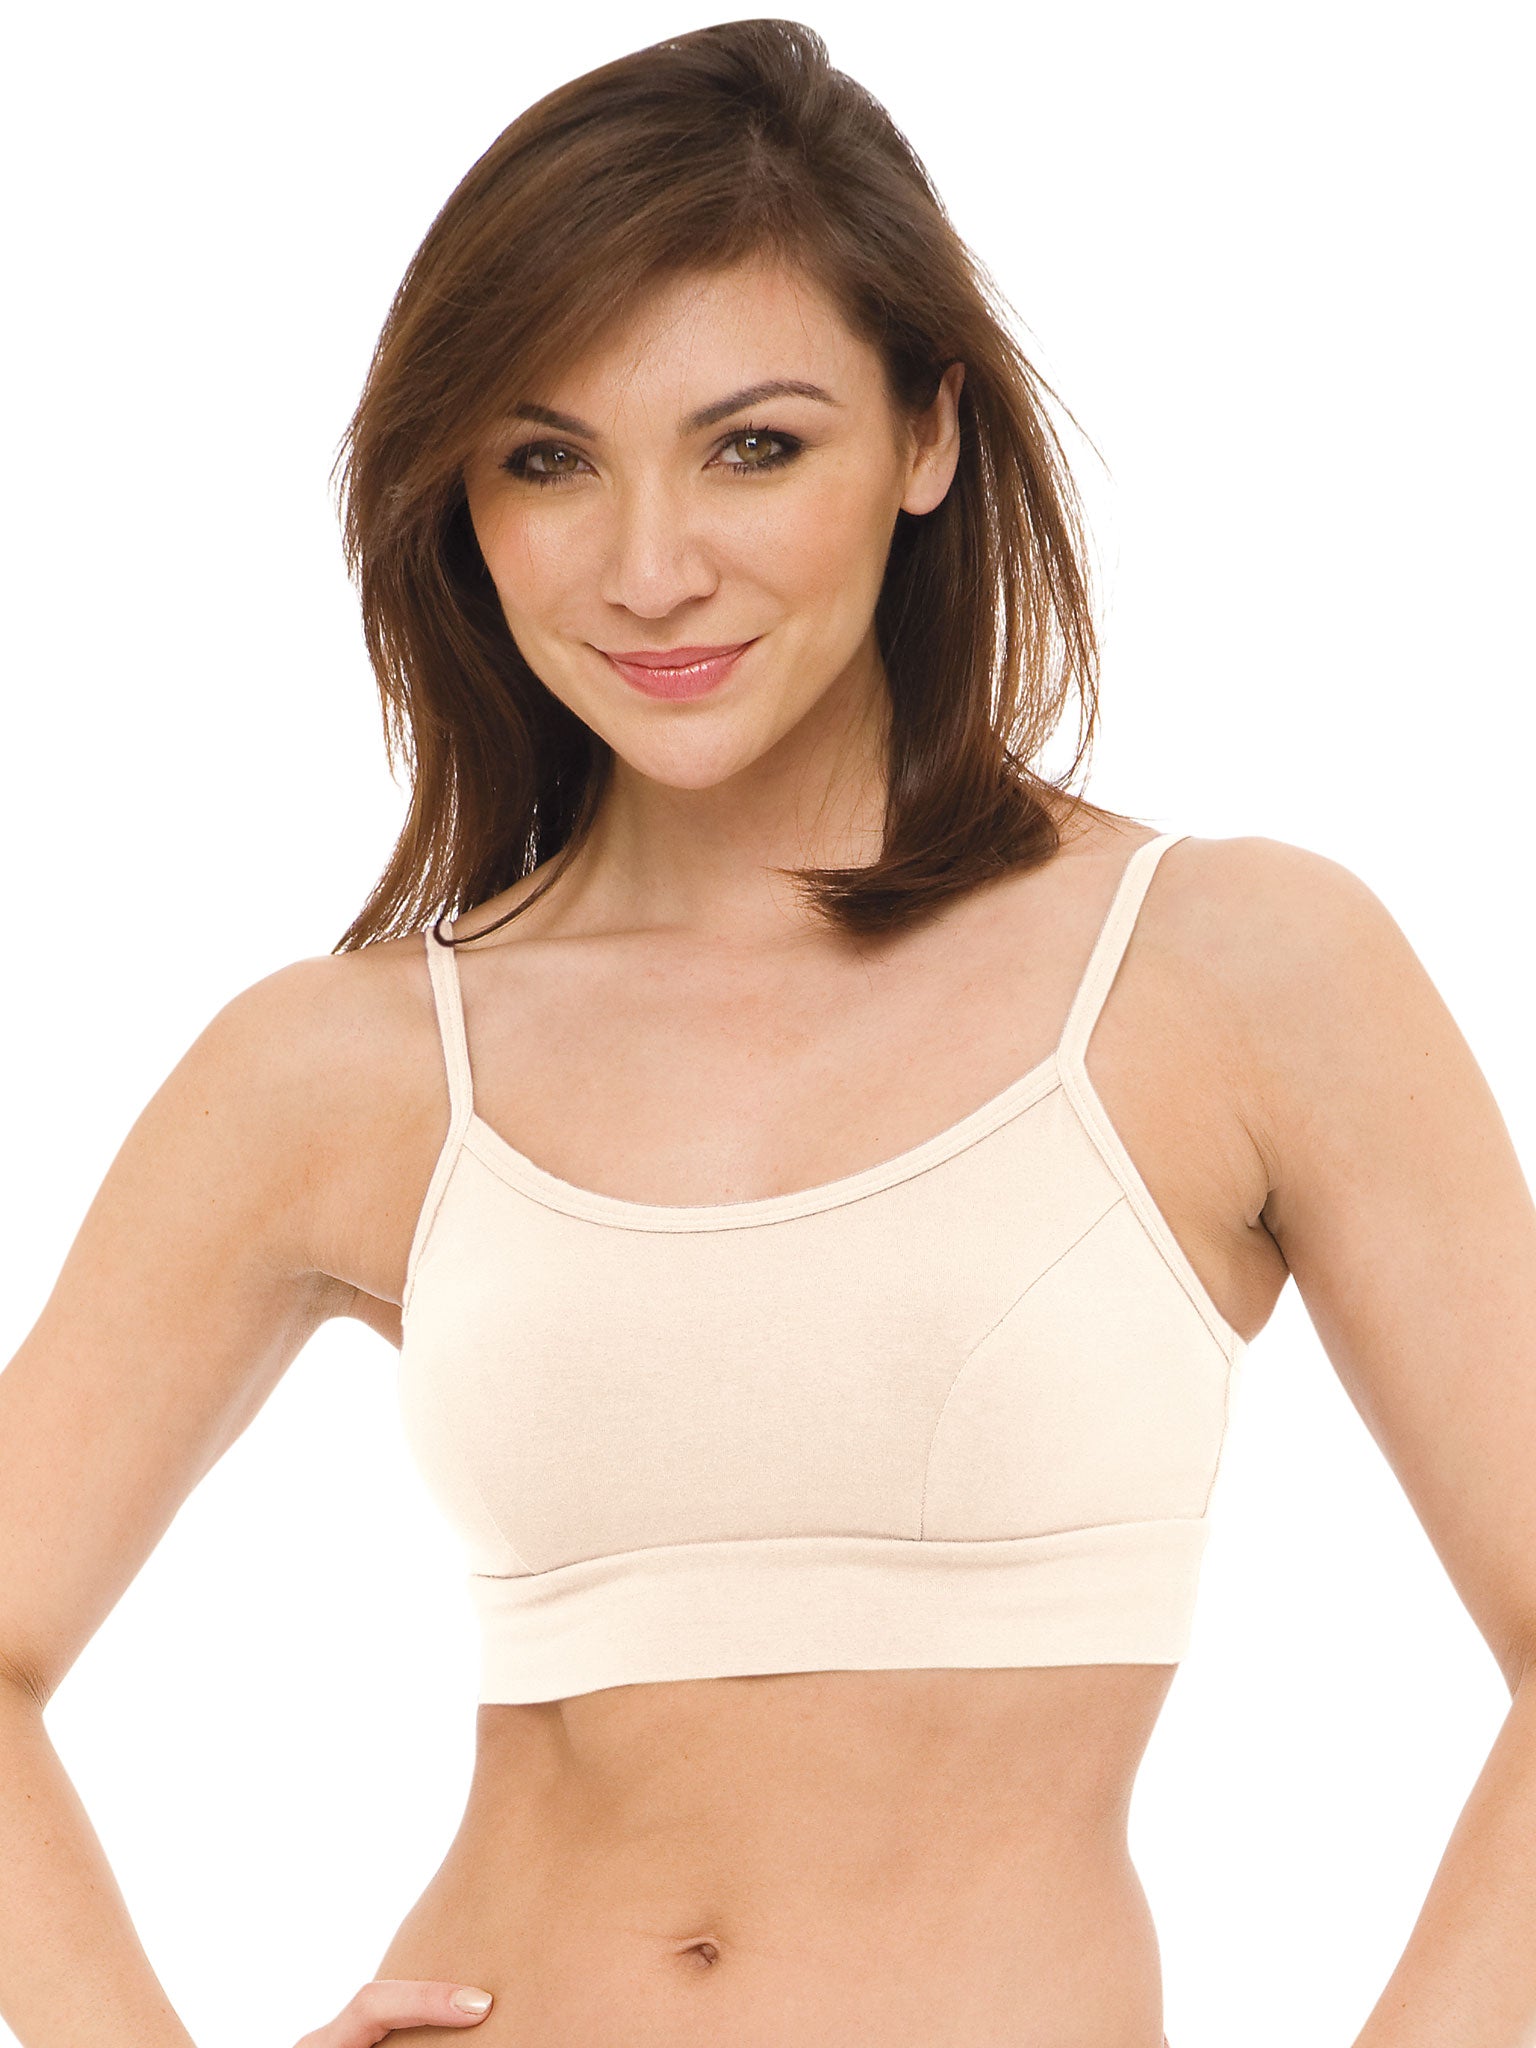 Organic Cotton Cami Bra Top (Grown & Made in USA)  Fitness wear outfits,  Boy shorts, Organic linens